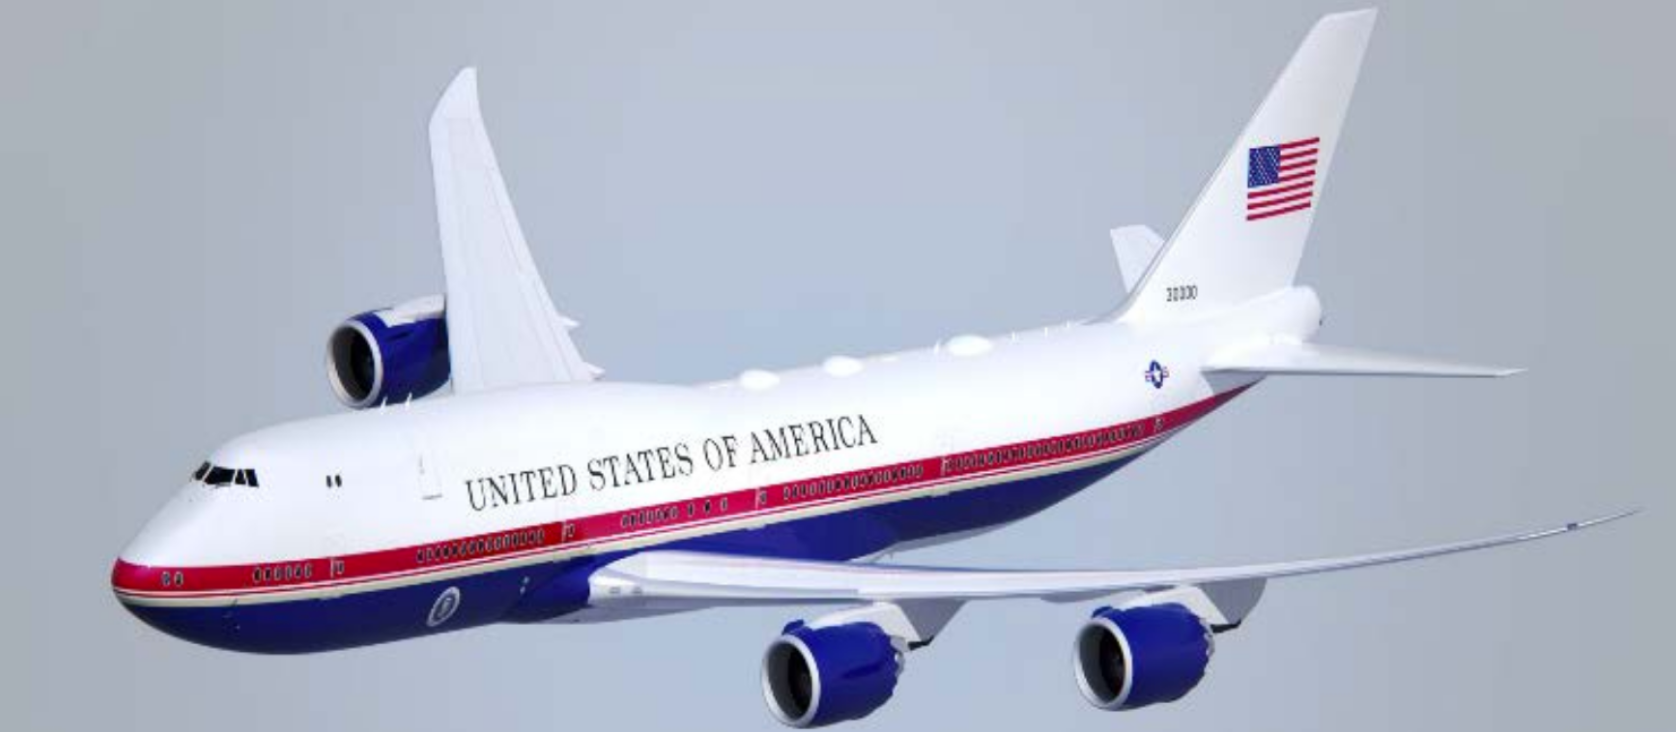 Air Force One livery